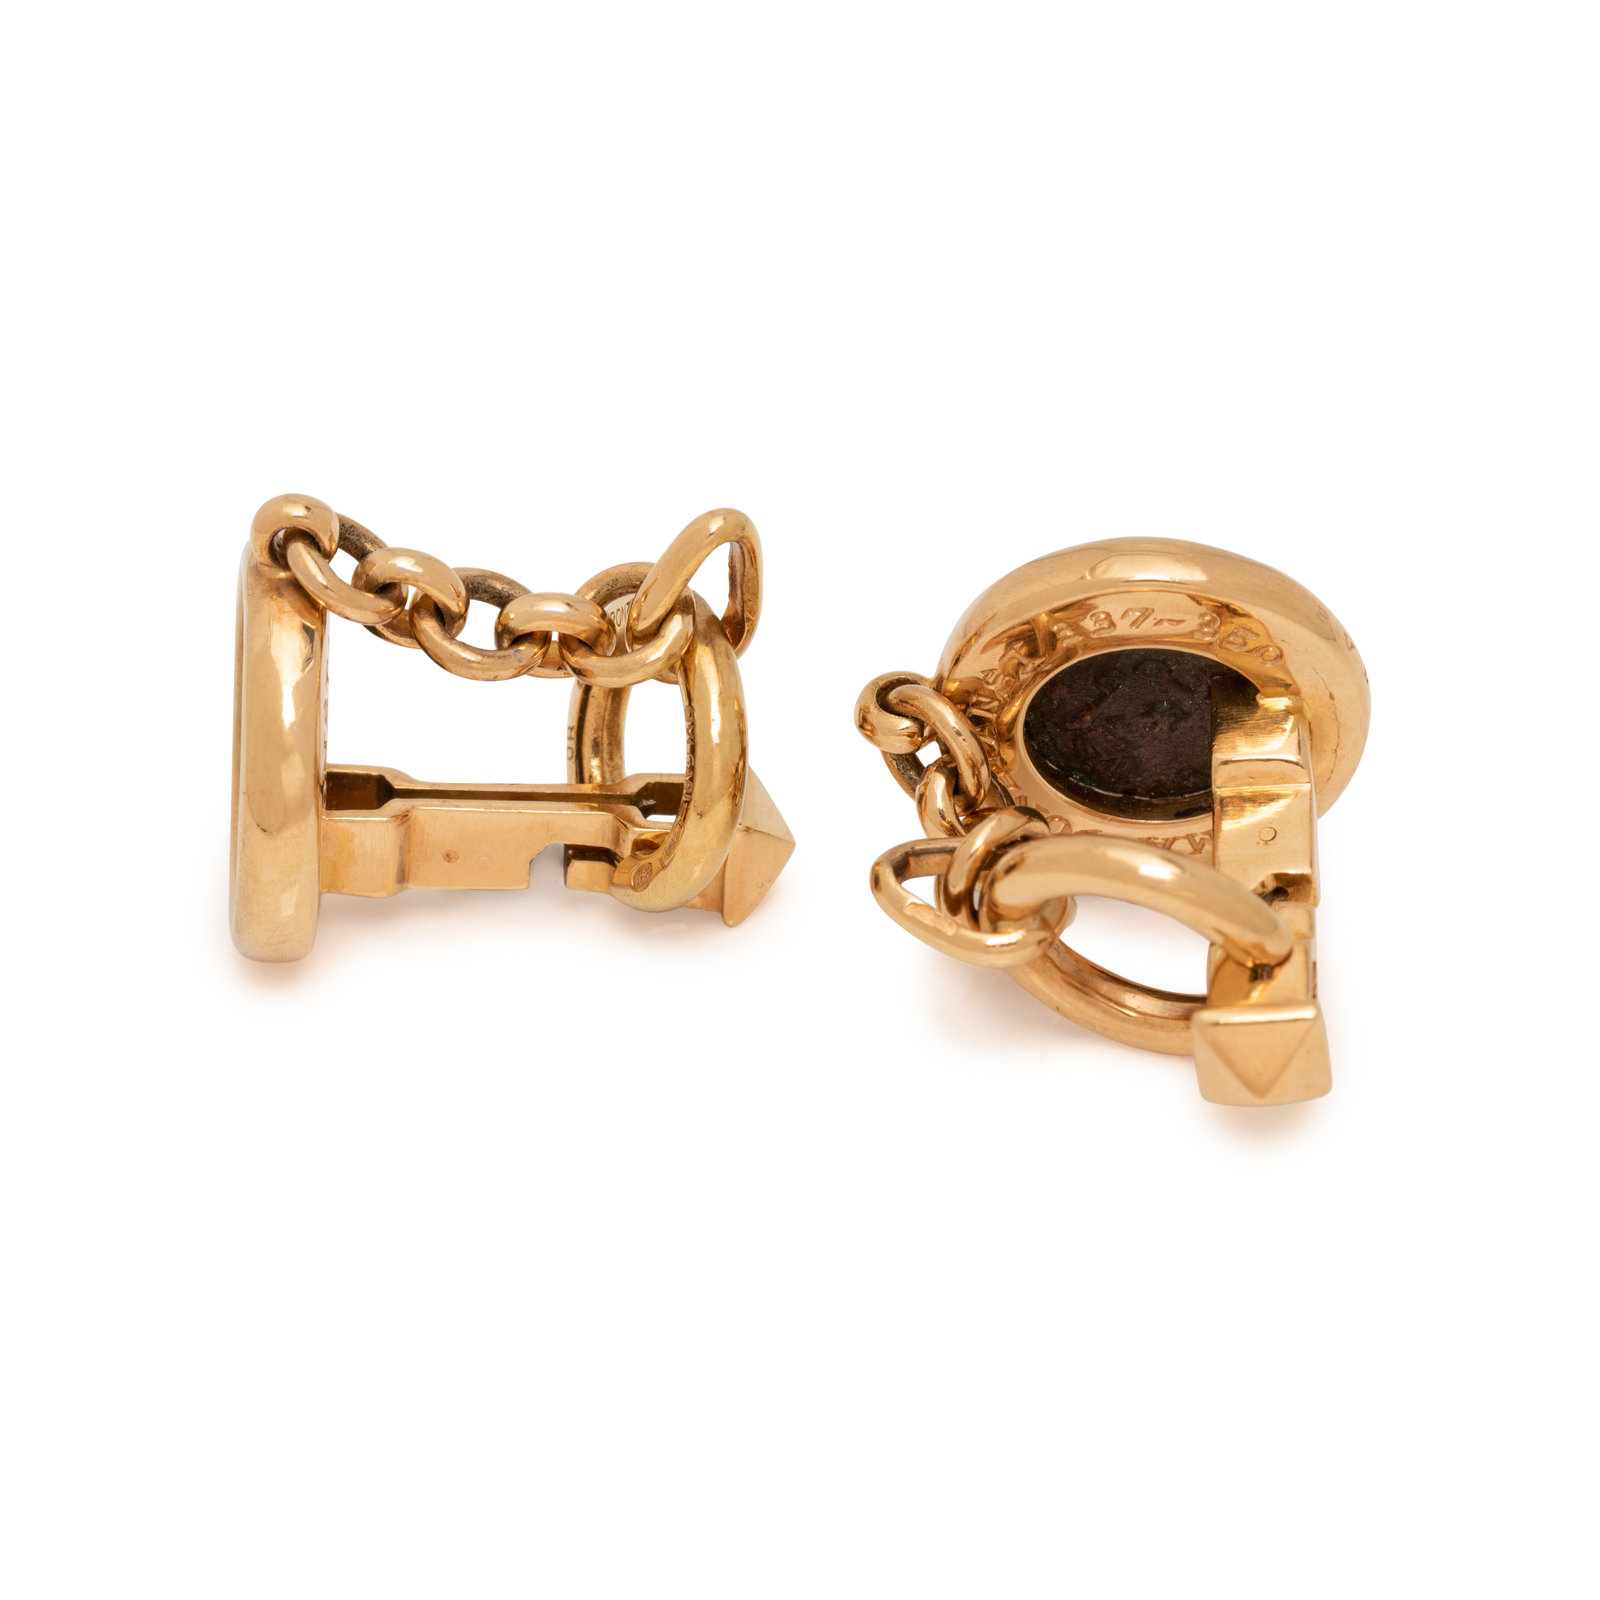 Bvlgari Gold And Antique Coin Monete Cufflinks Available For